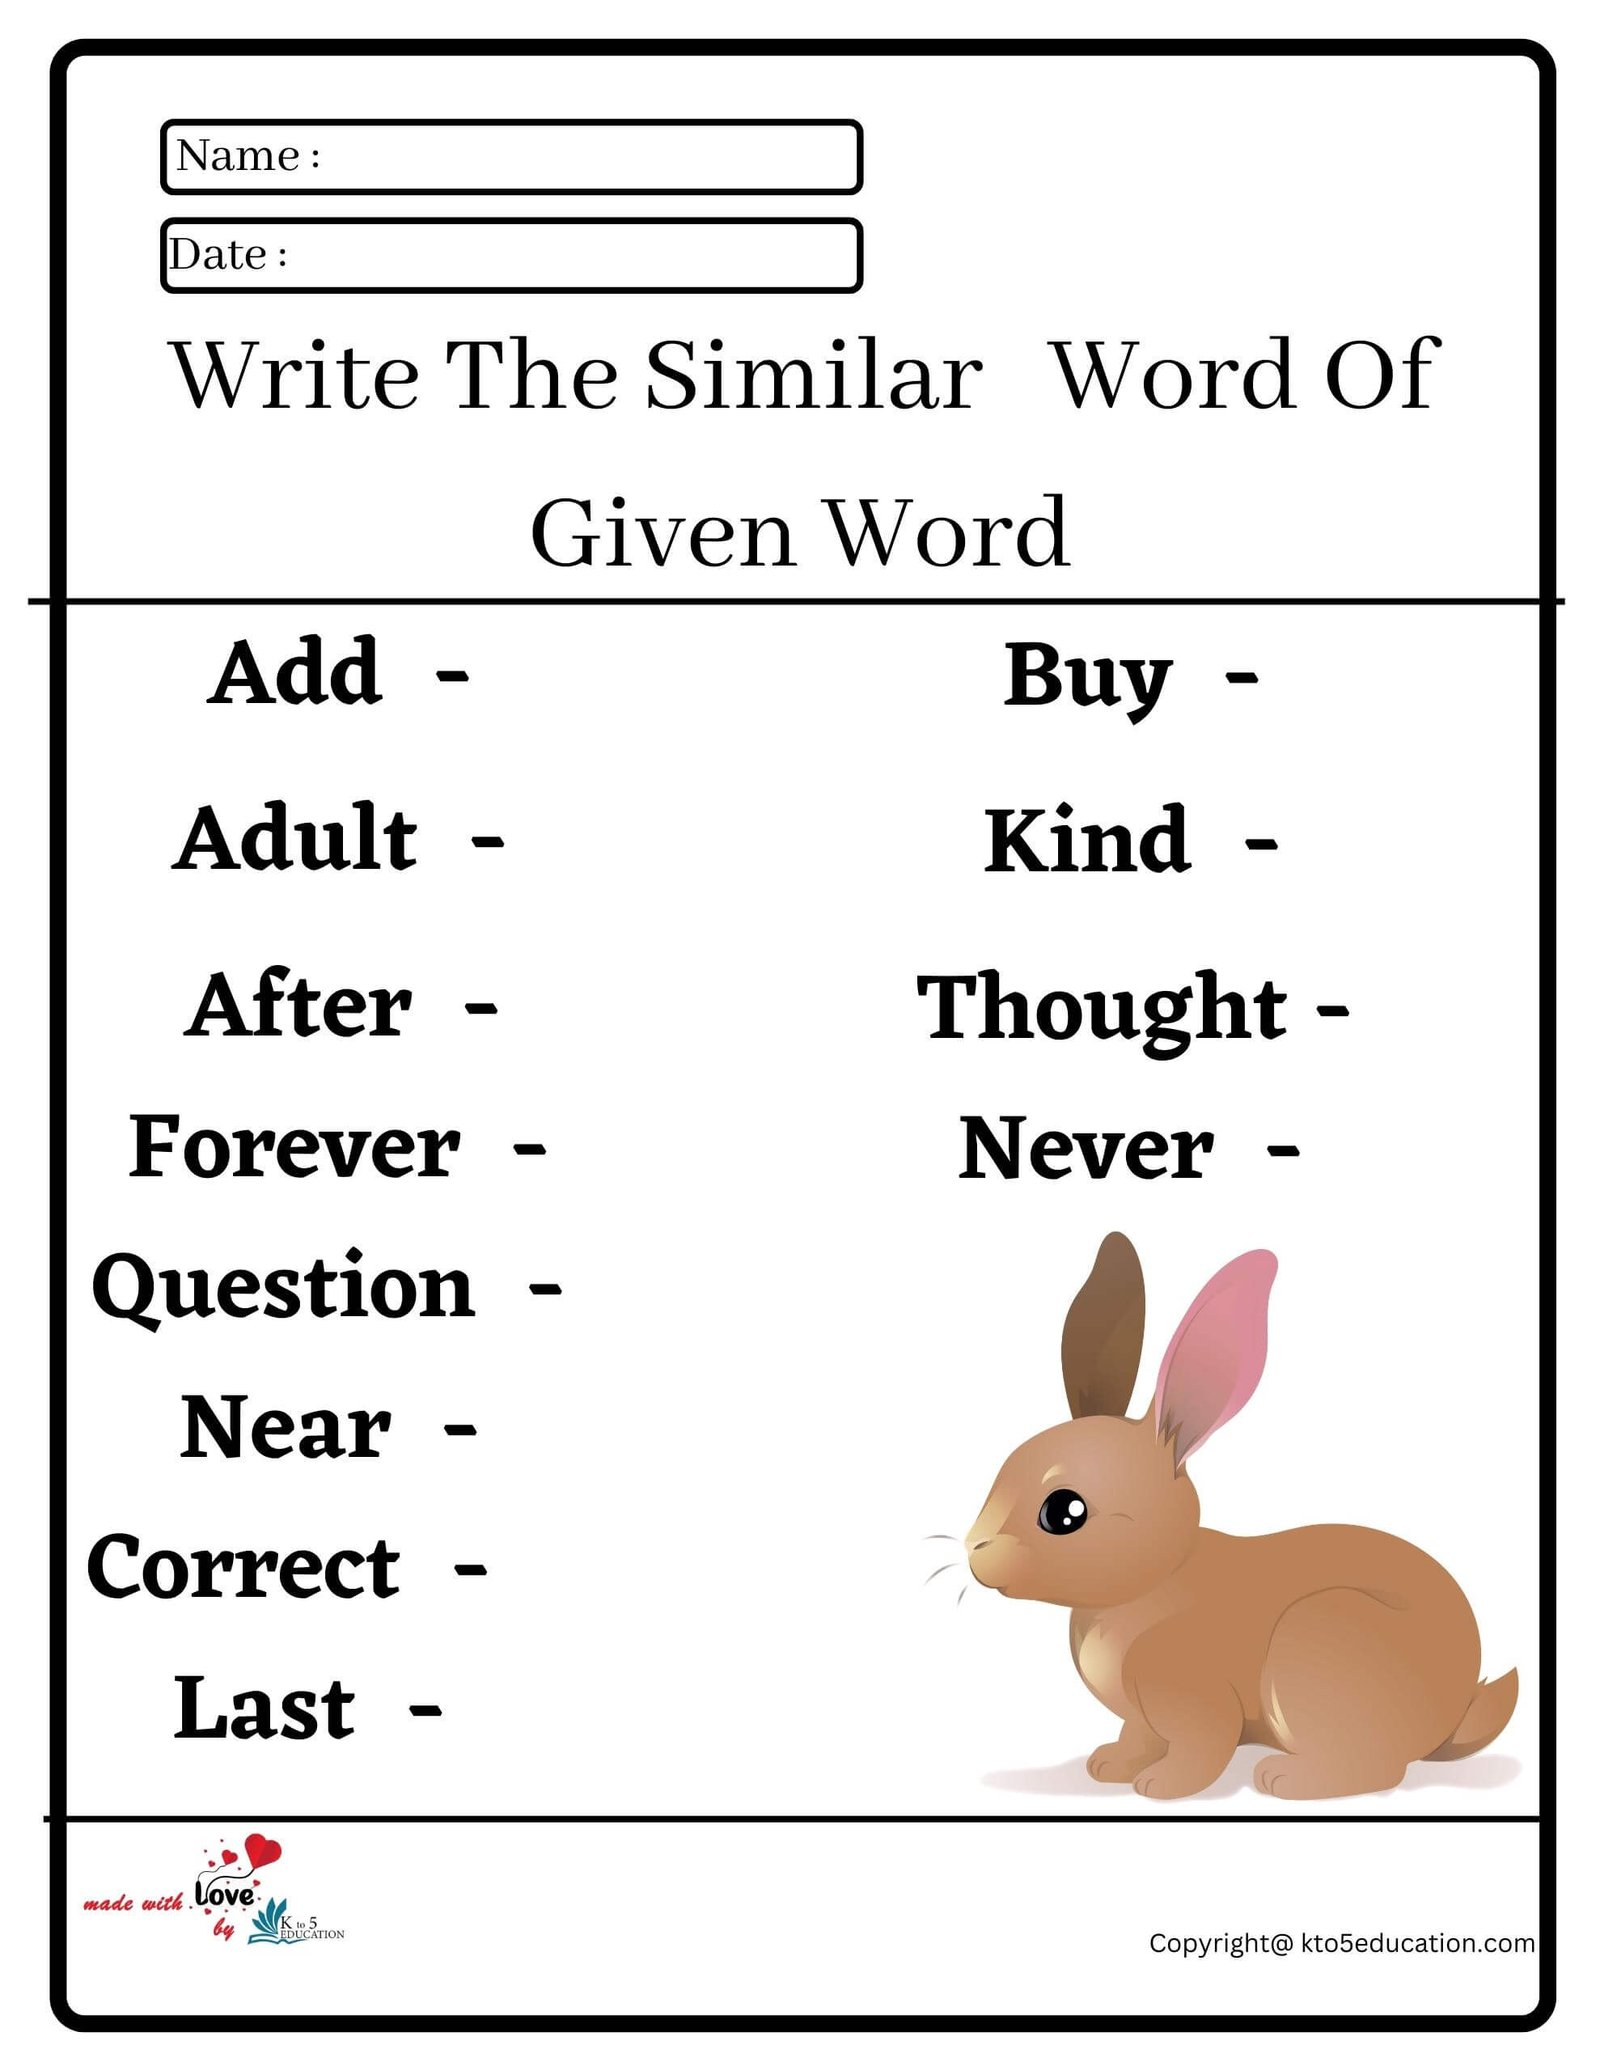 Write The Similar Word Of Given Word Worksheet